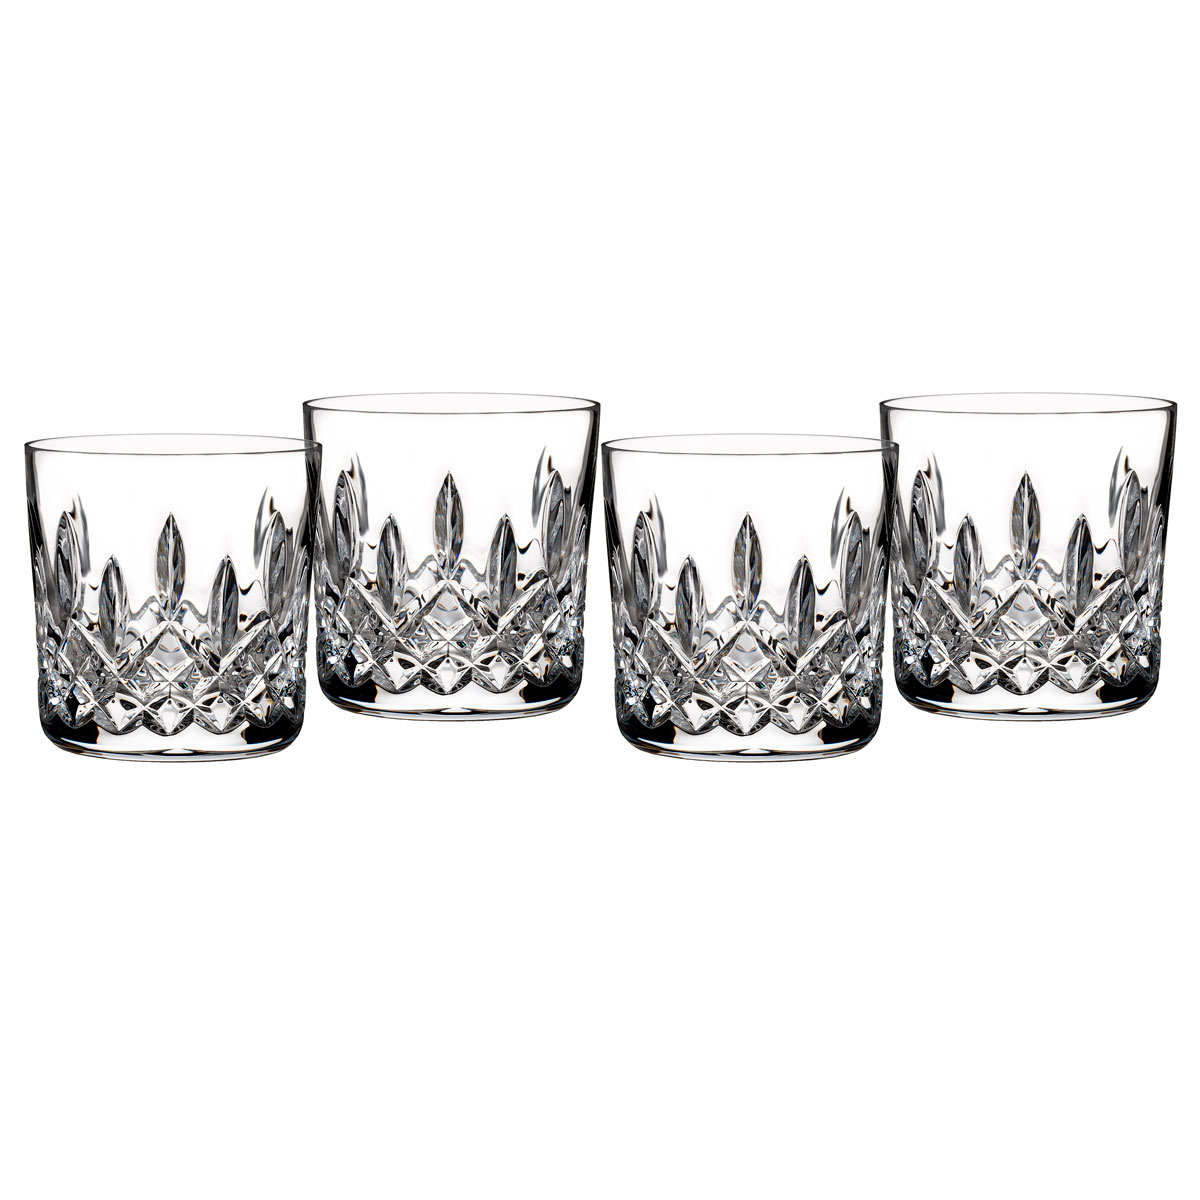 1 Clear Waterford Giftology Tumbler Set/2 